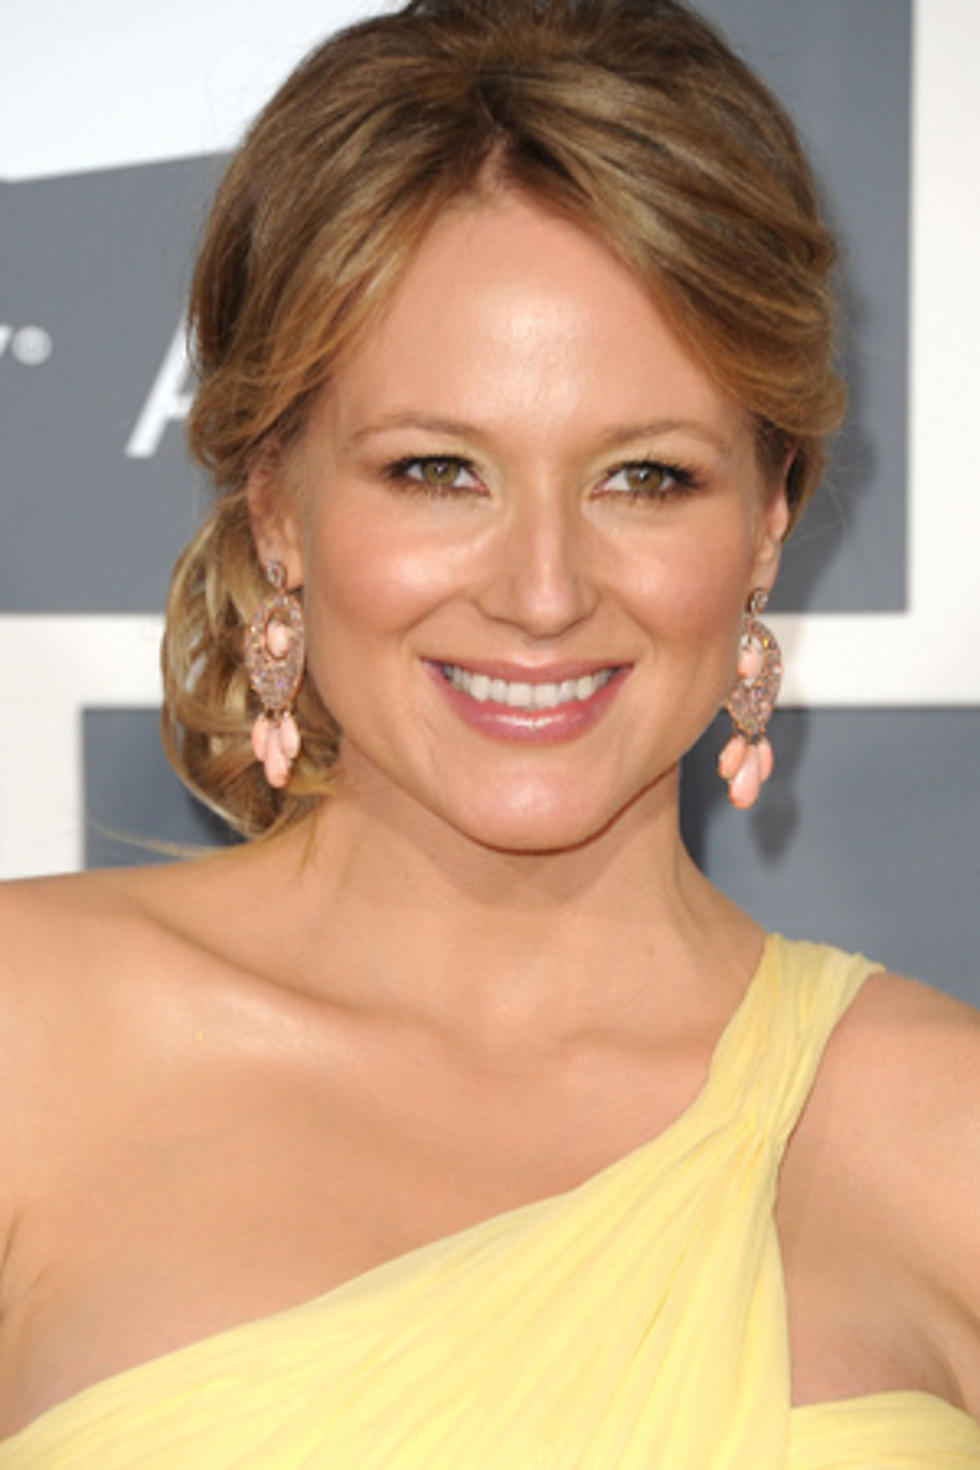 Jewel to Host New Show &#8216;Platinum Hit,&#8217; Which Debuts on May 30